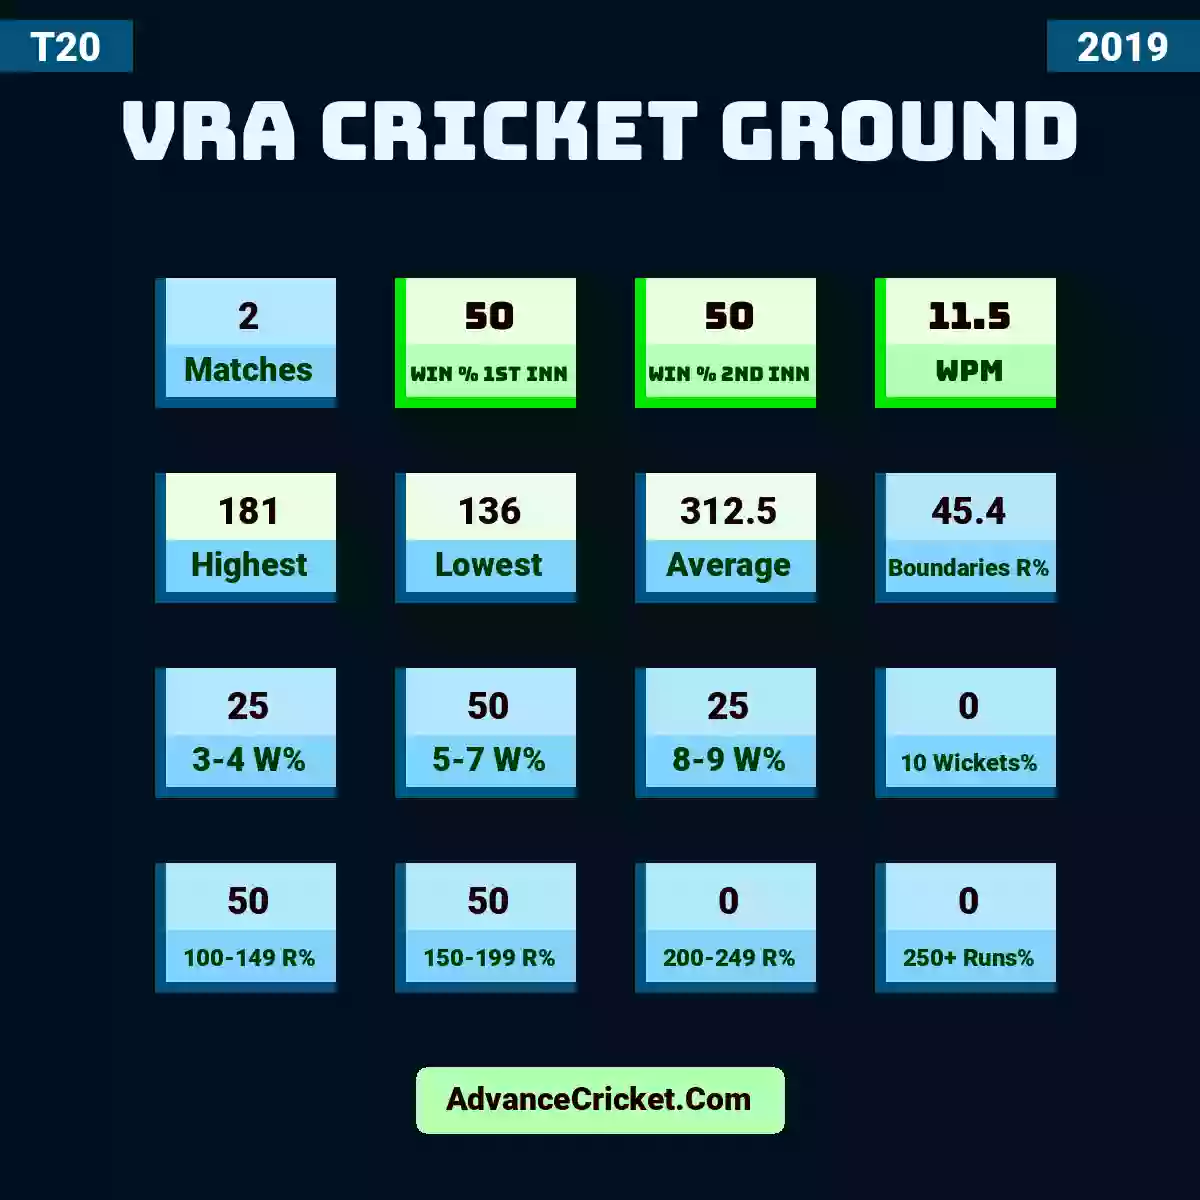 Image showing VRA Cricket Ground with Matches: 2, Win % 1st Inn: 50, Win % 2nd Inn: 50, WPM: 11.5, Highest: 181, Lowest: 136, Average: 312.5, Boundaries R%: 45.4, 3-4 W%: 25, 5-7 W%: 50, 8-9 W%: 25, 10 Wickets%: 0, 100-149 R%: 50, 150-199 R%: 50, 200-249 R%: 0, 250+ Runs%: 0.